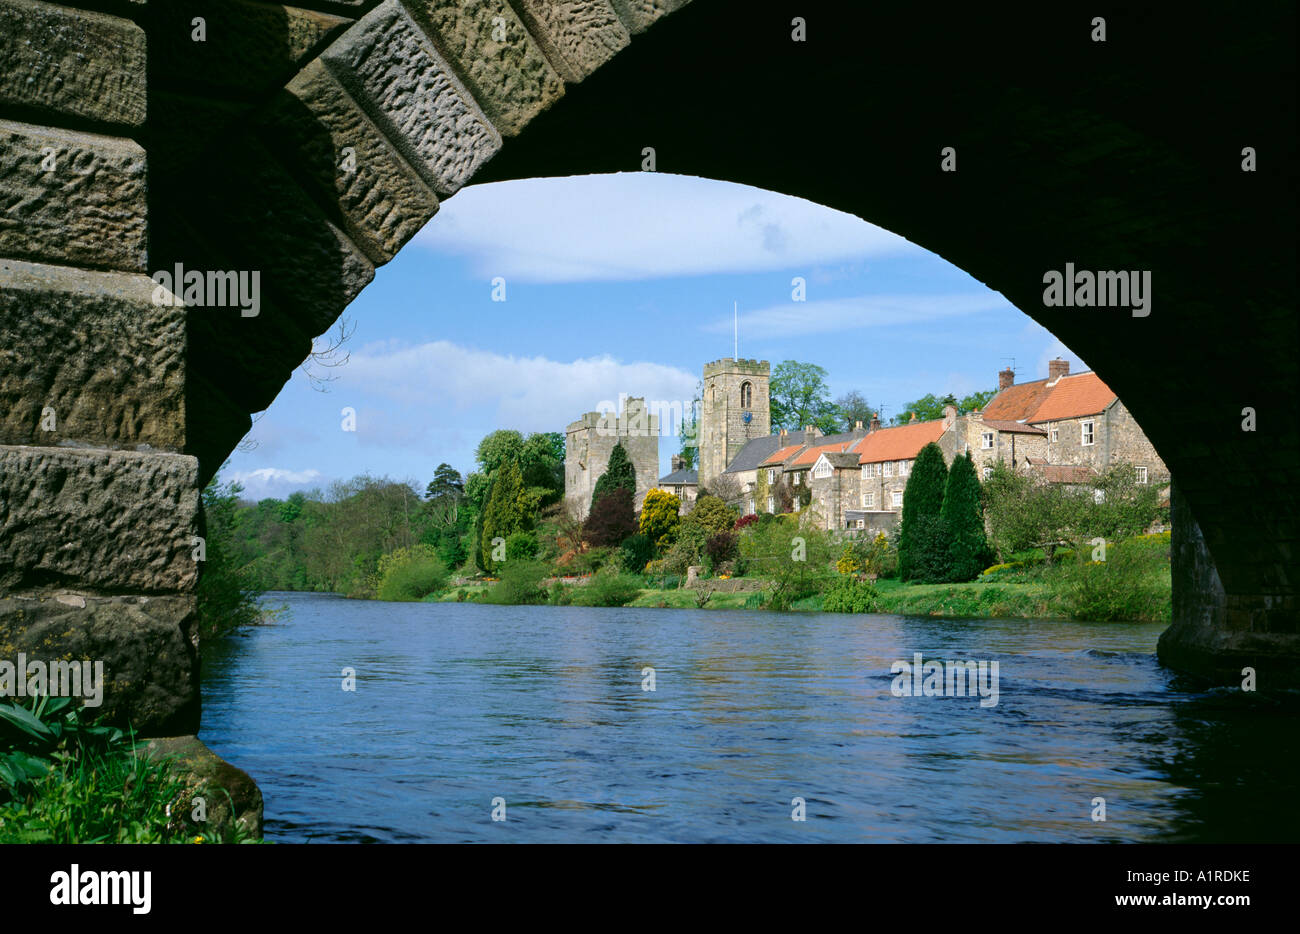 Marmion Tower and church seen over River Ure, West Tanfield, near Masham, North Yorkshire, England, UK. Stock Photo